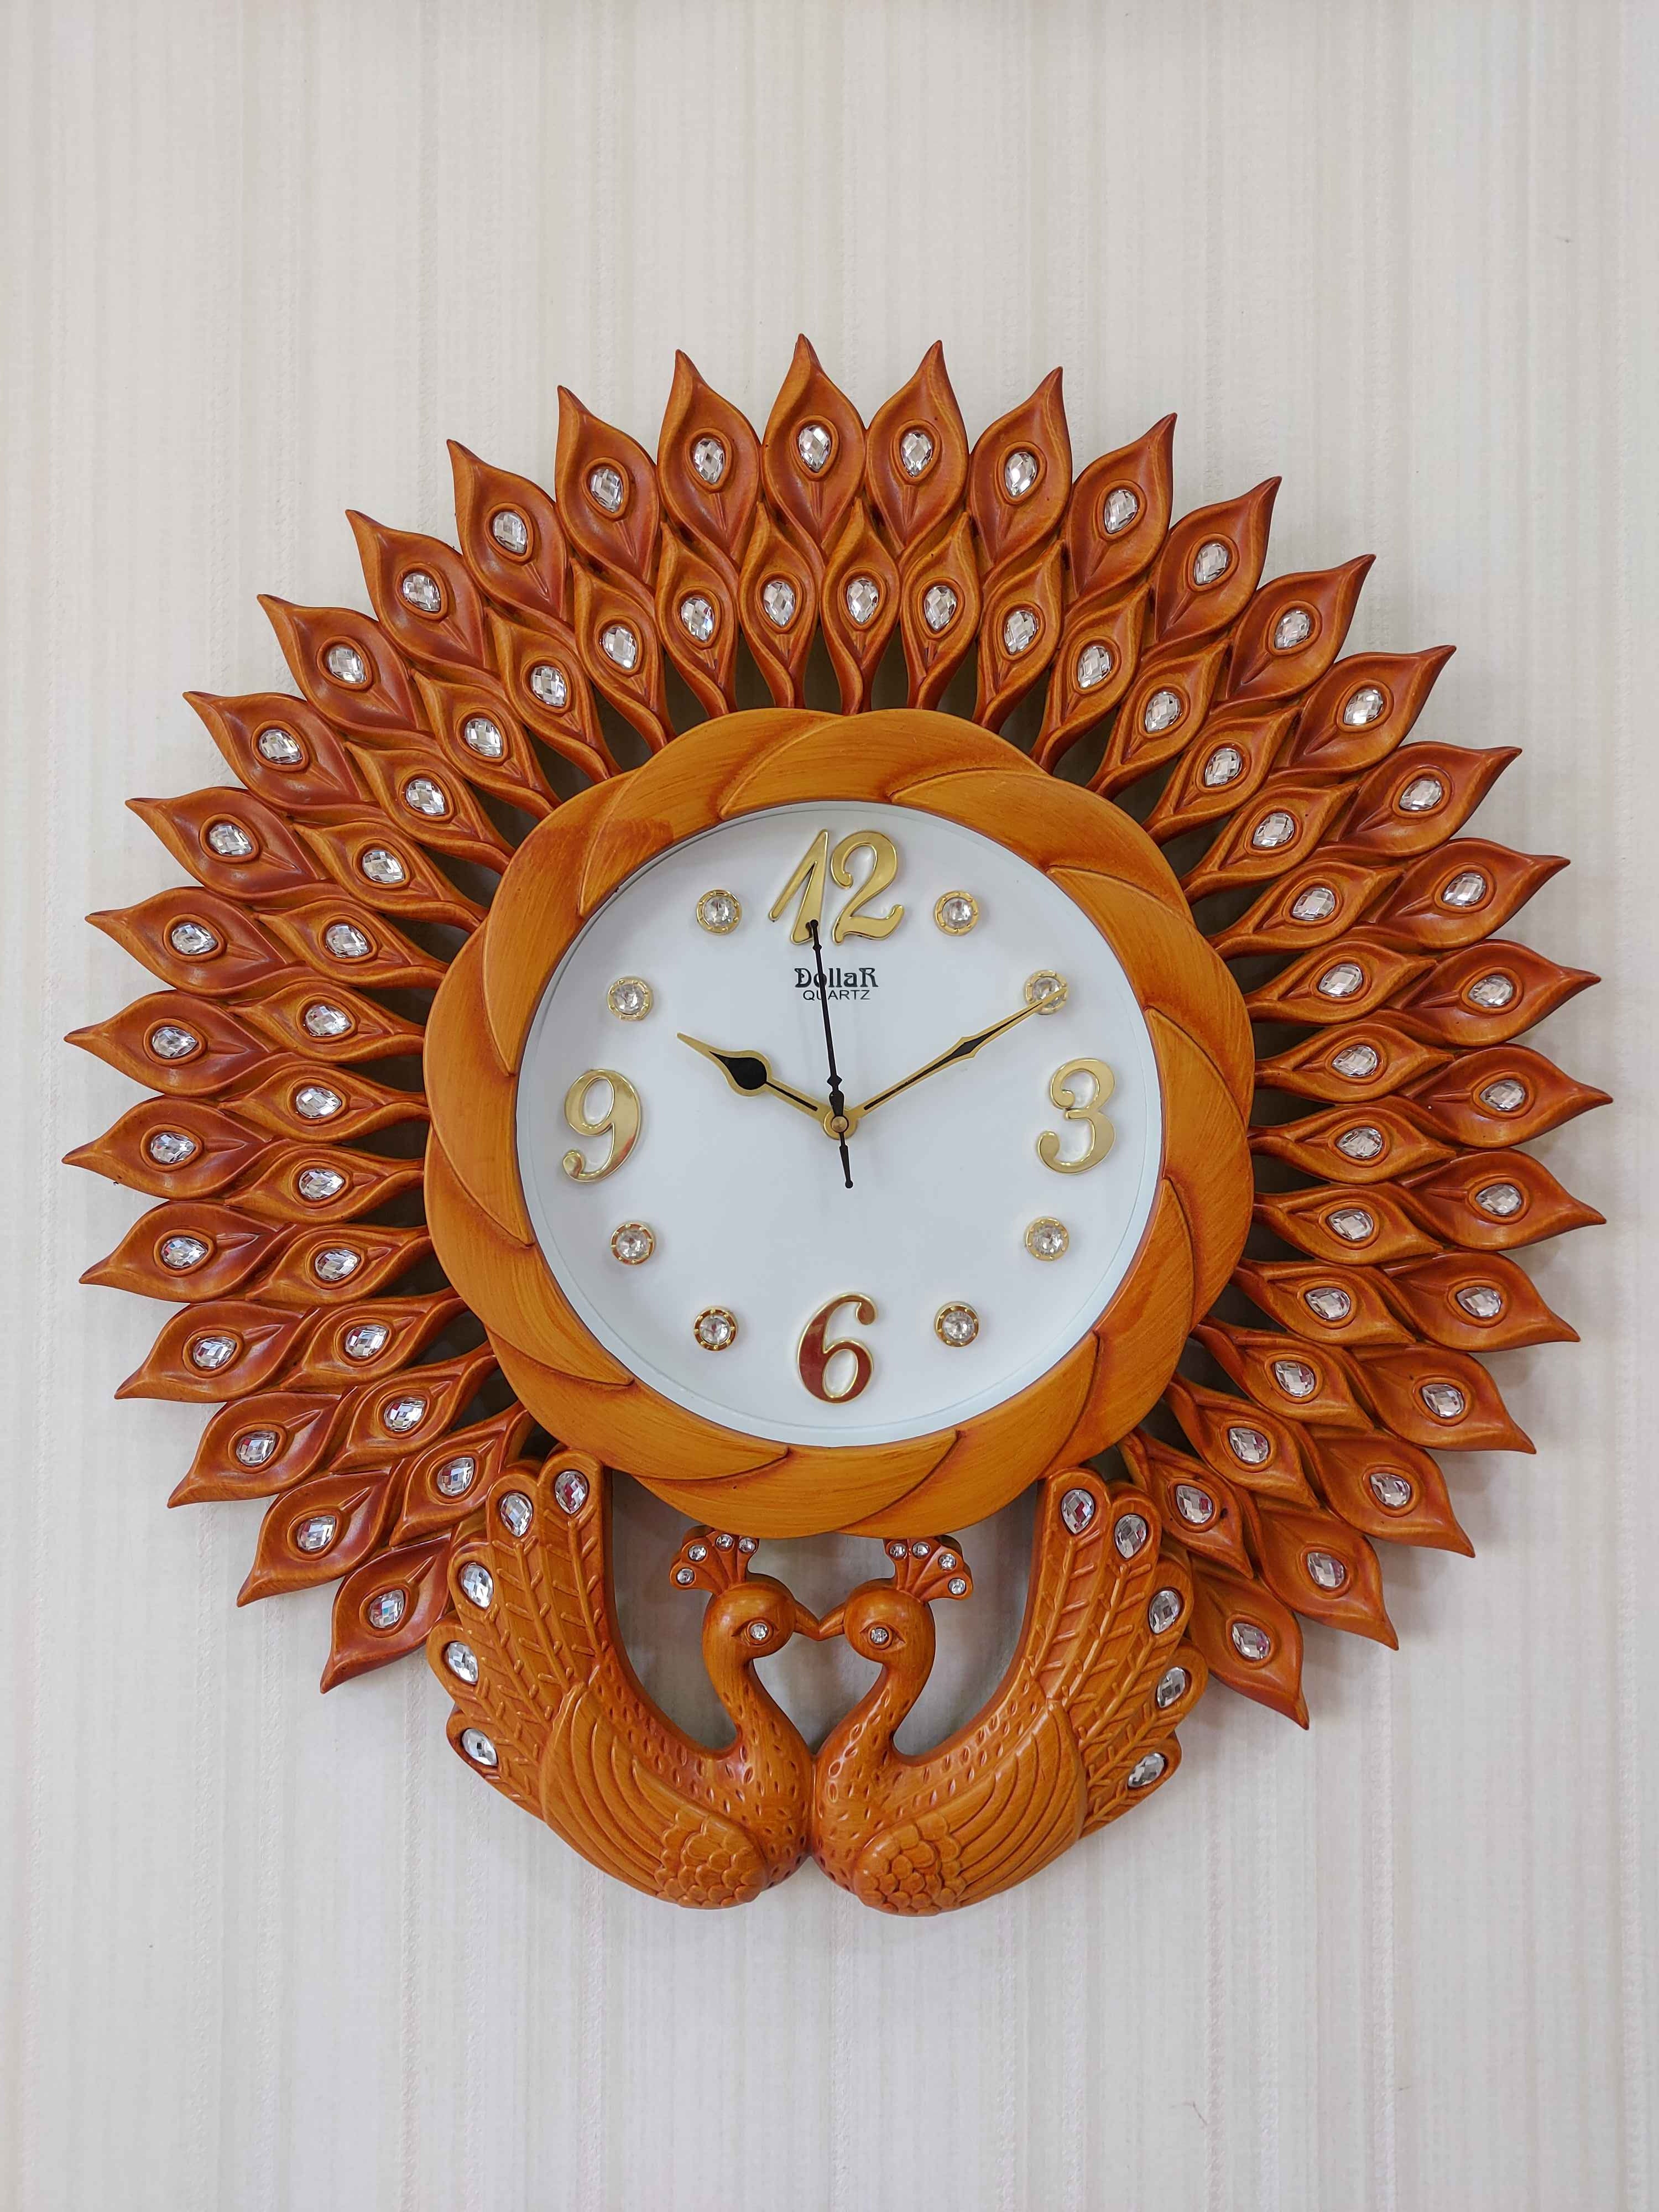 FunkyTradition Designer Tan Color Peacock Wall Clock , Wall Watch , Wall Décor for Home Office Decor and Gifts 52 CM Tall